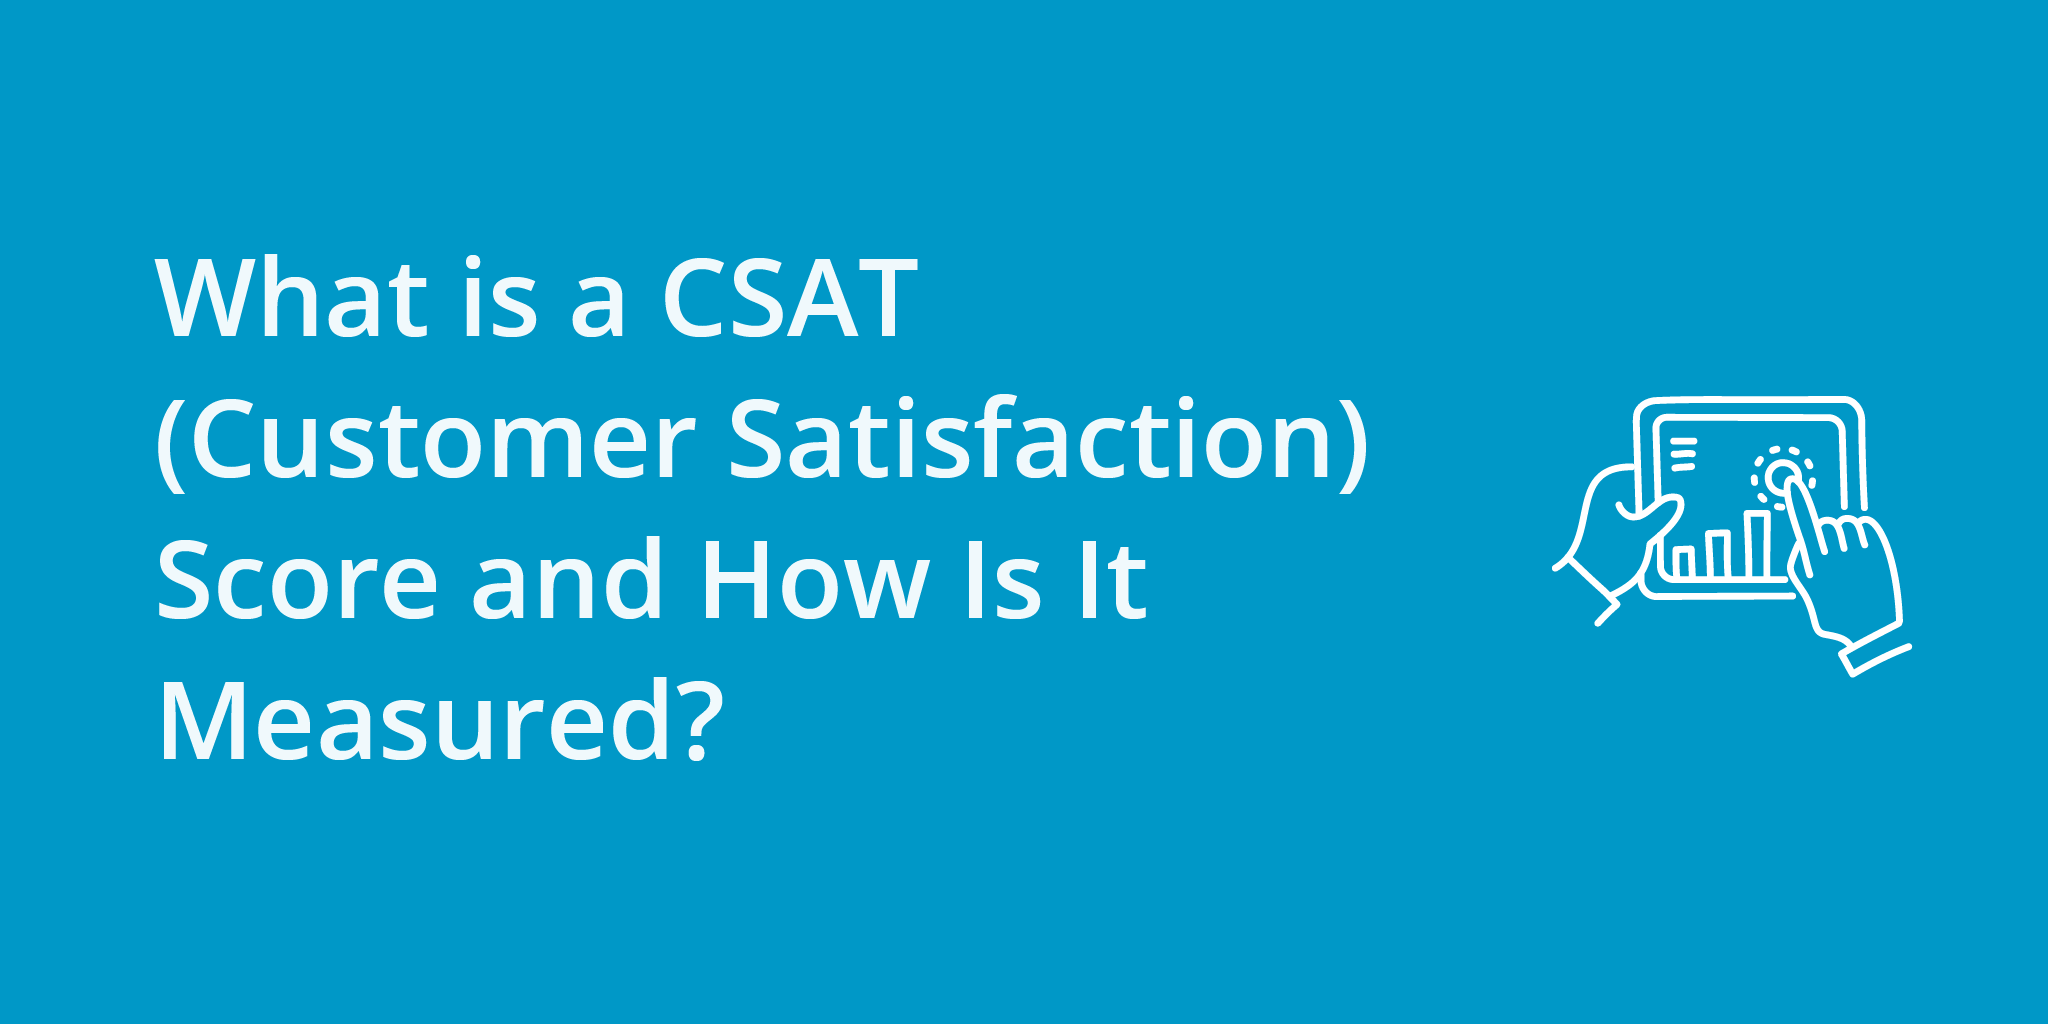 What is a CSAT (Customer Satisfaction) Score and How Is It Measured? | Telephones for business